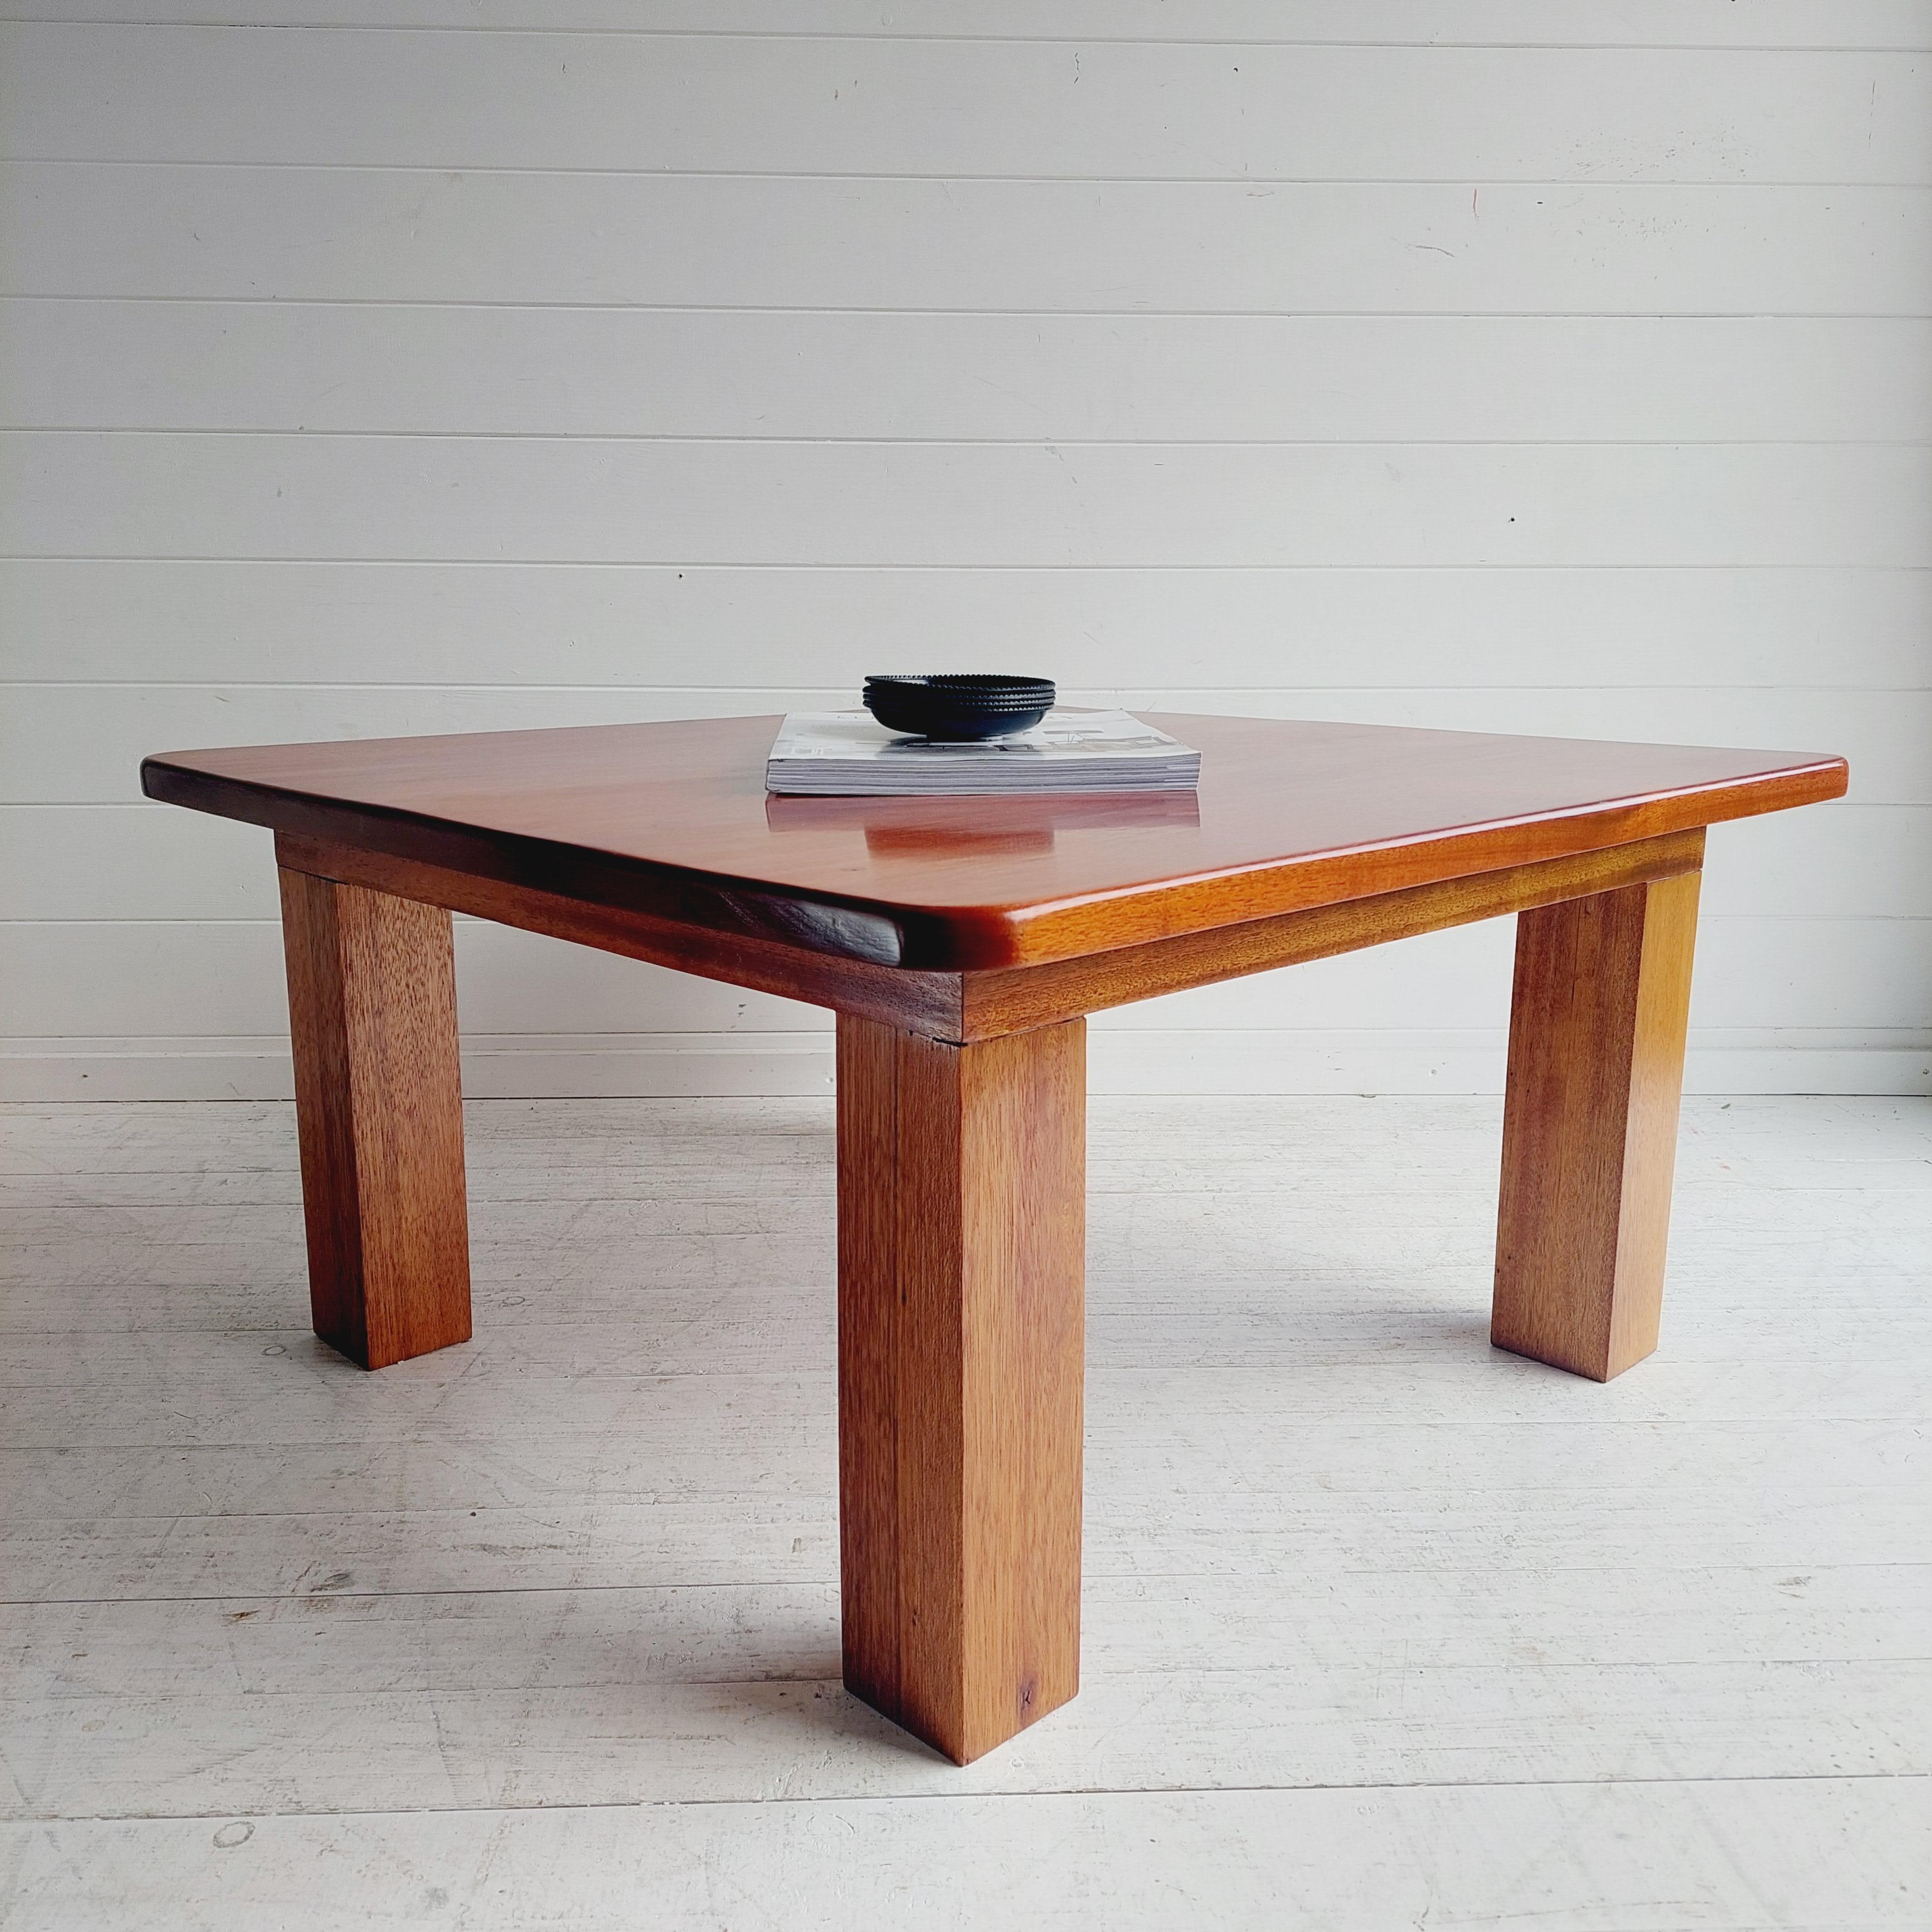 A beautiful and stunning large restored Teak square coffee table designed in the manner of Pierre Chapo.
Simple and no-nonsense, this example of repurposed art allows the knots, grains and imperfections of the wood to shine in a low table rich in